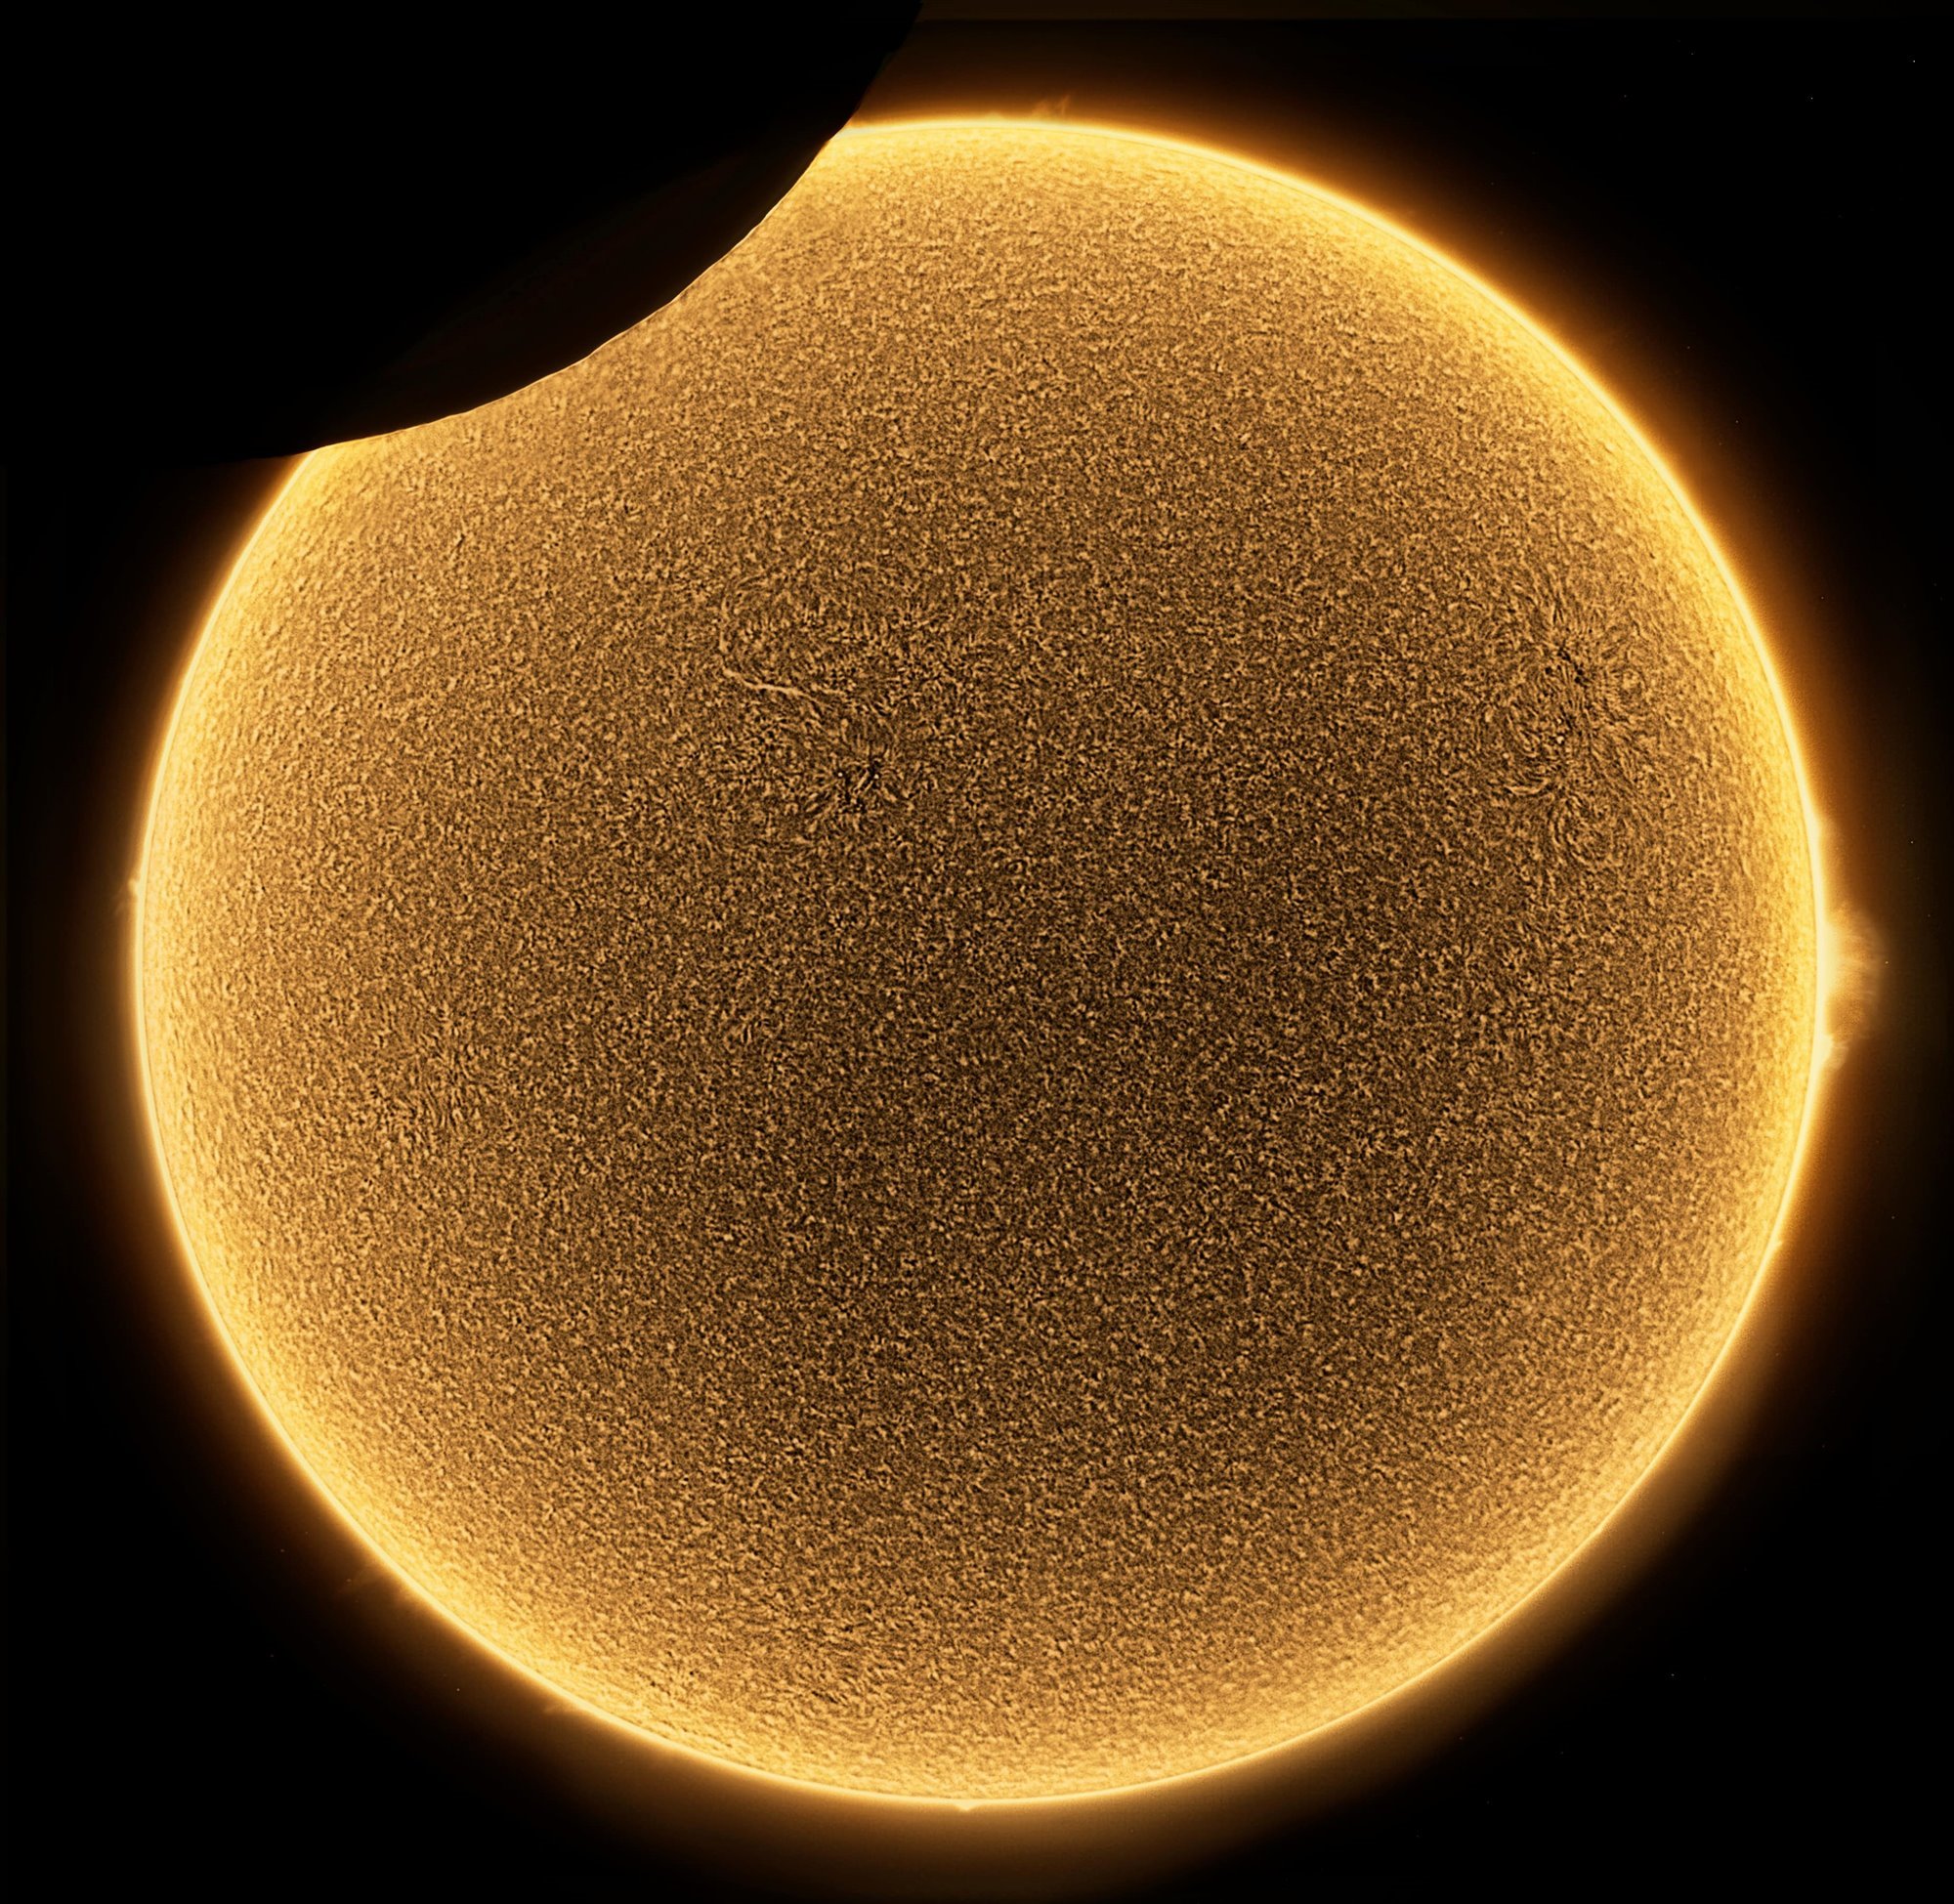 Partial eclipse of the Sun in H-alpha